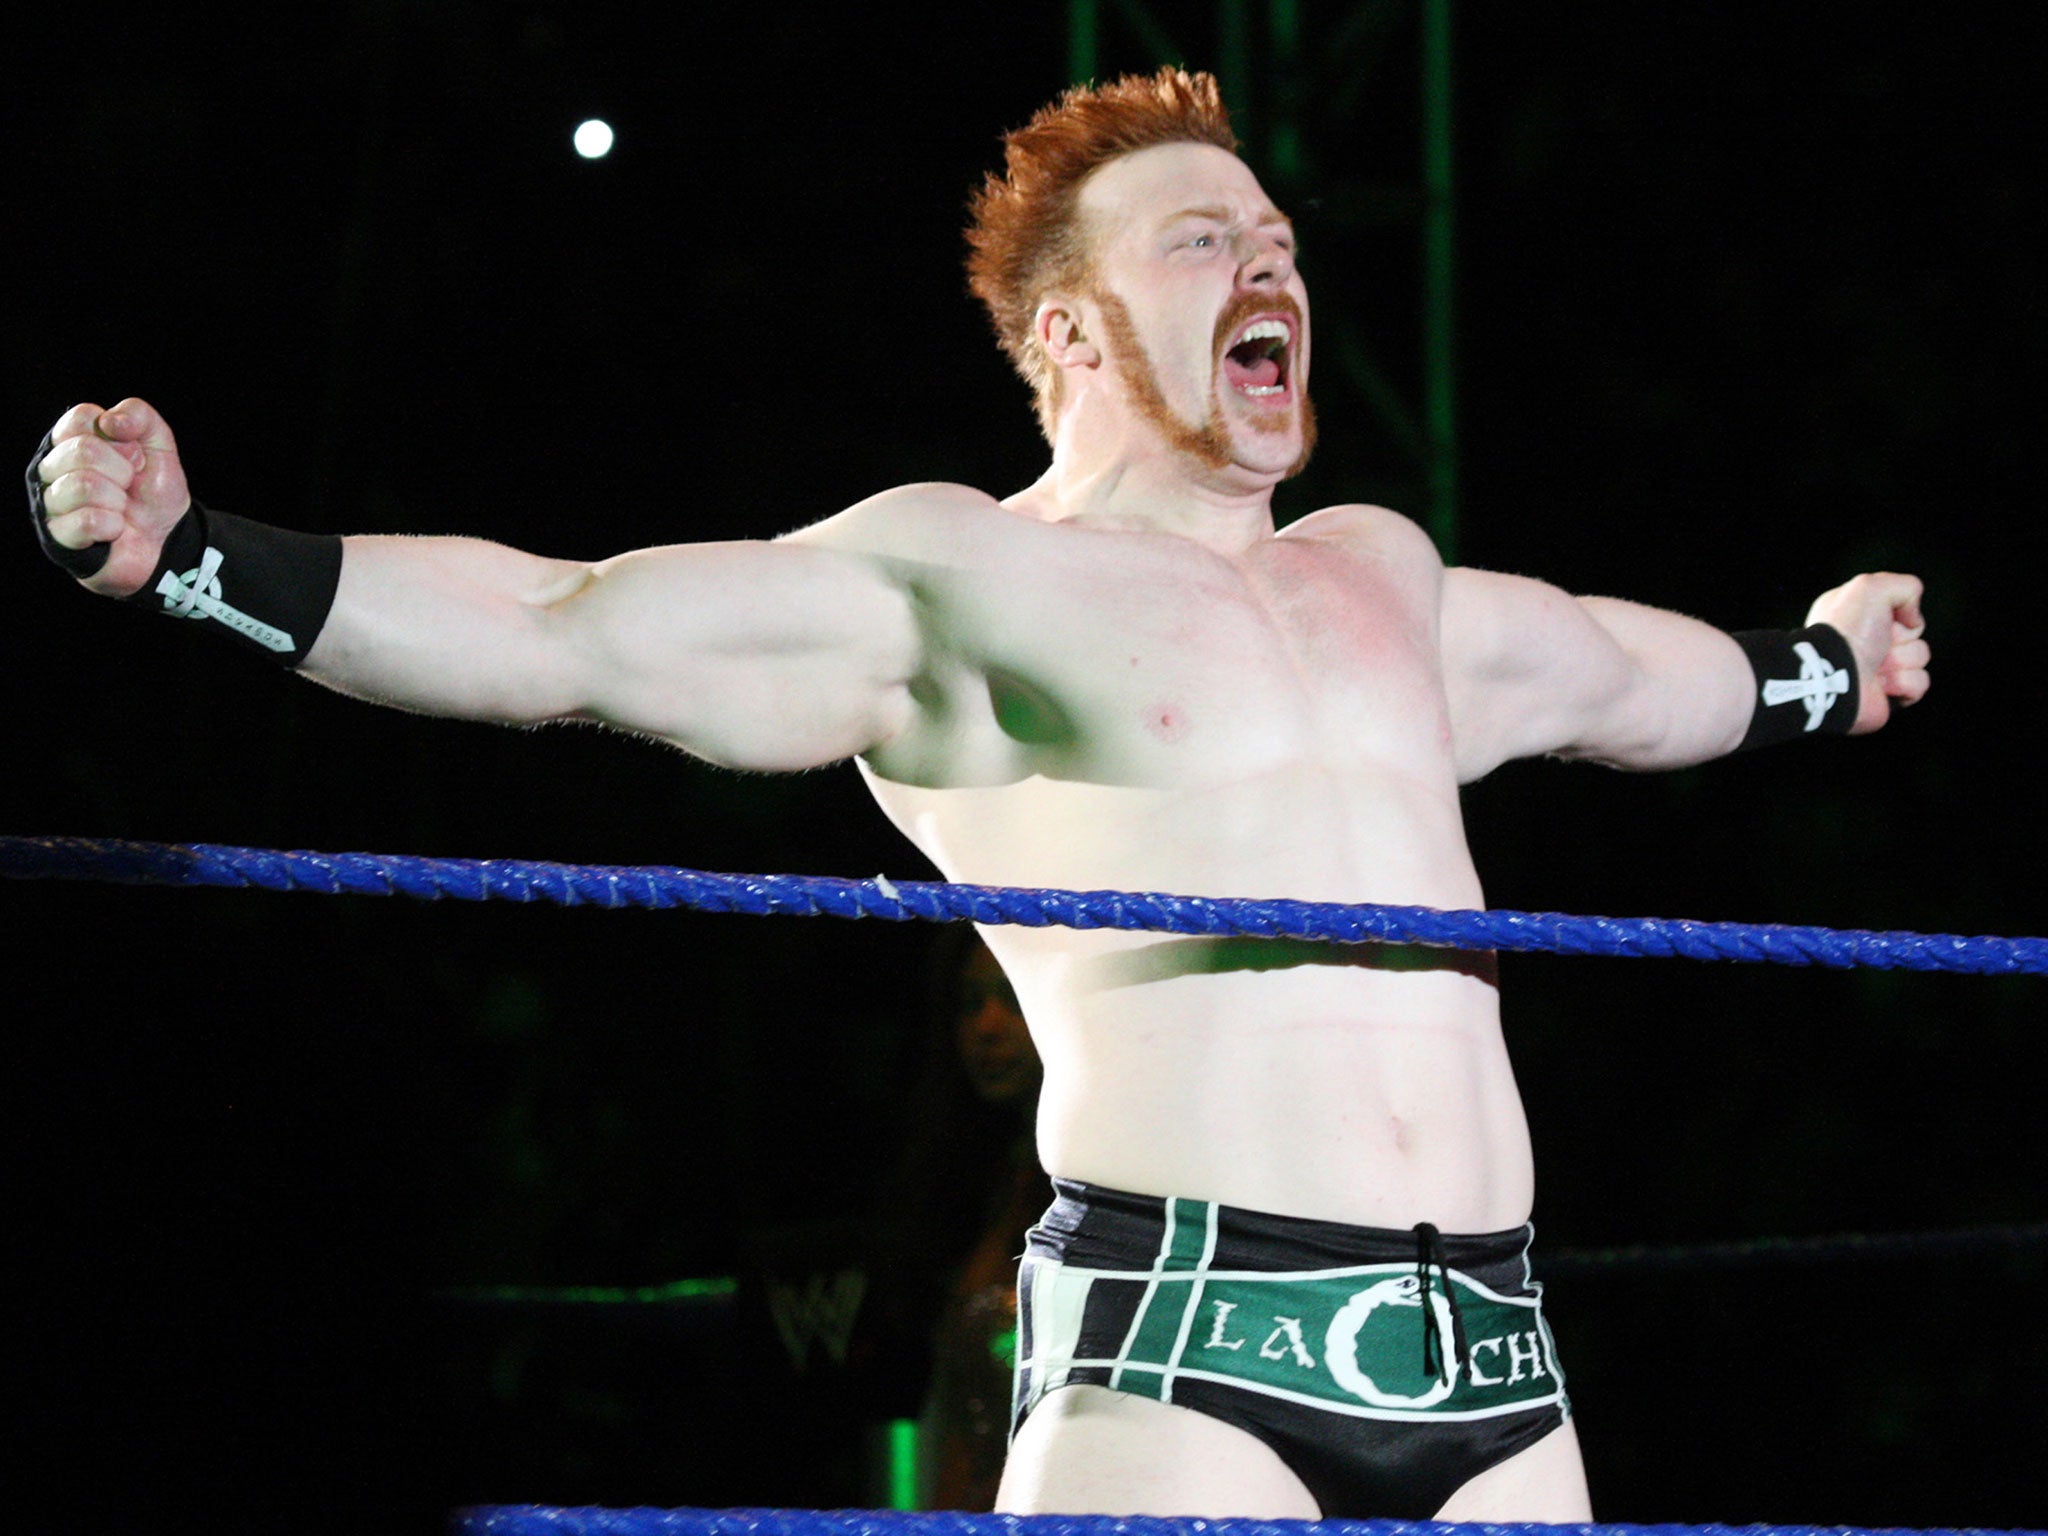 'Celtic Warrior' Sheamus in the WWE ring